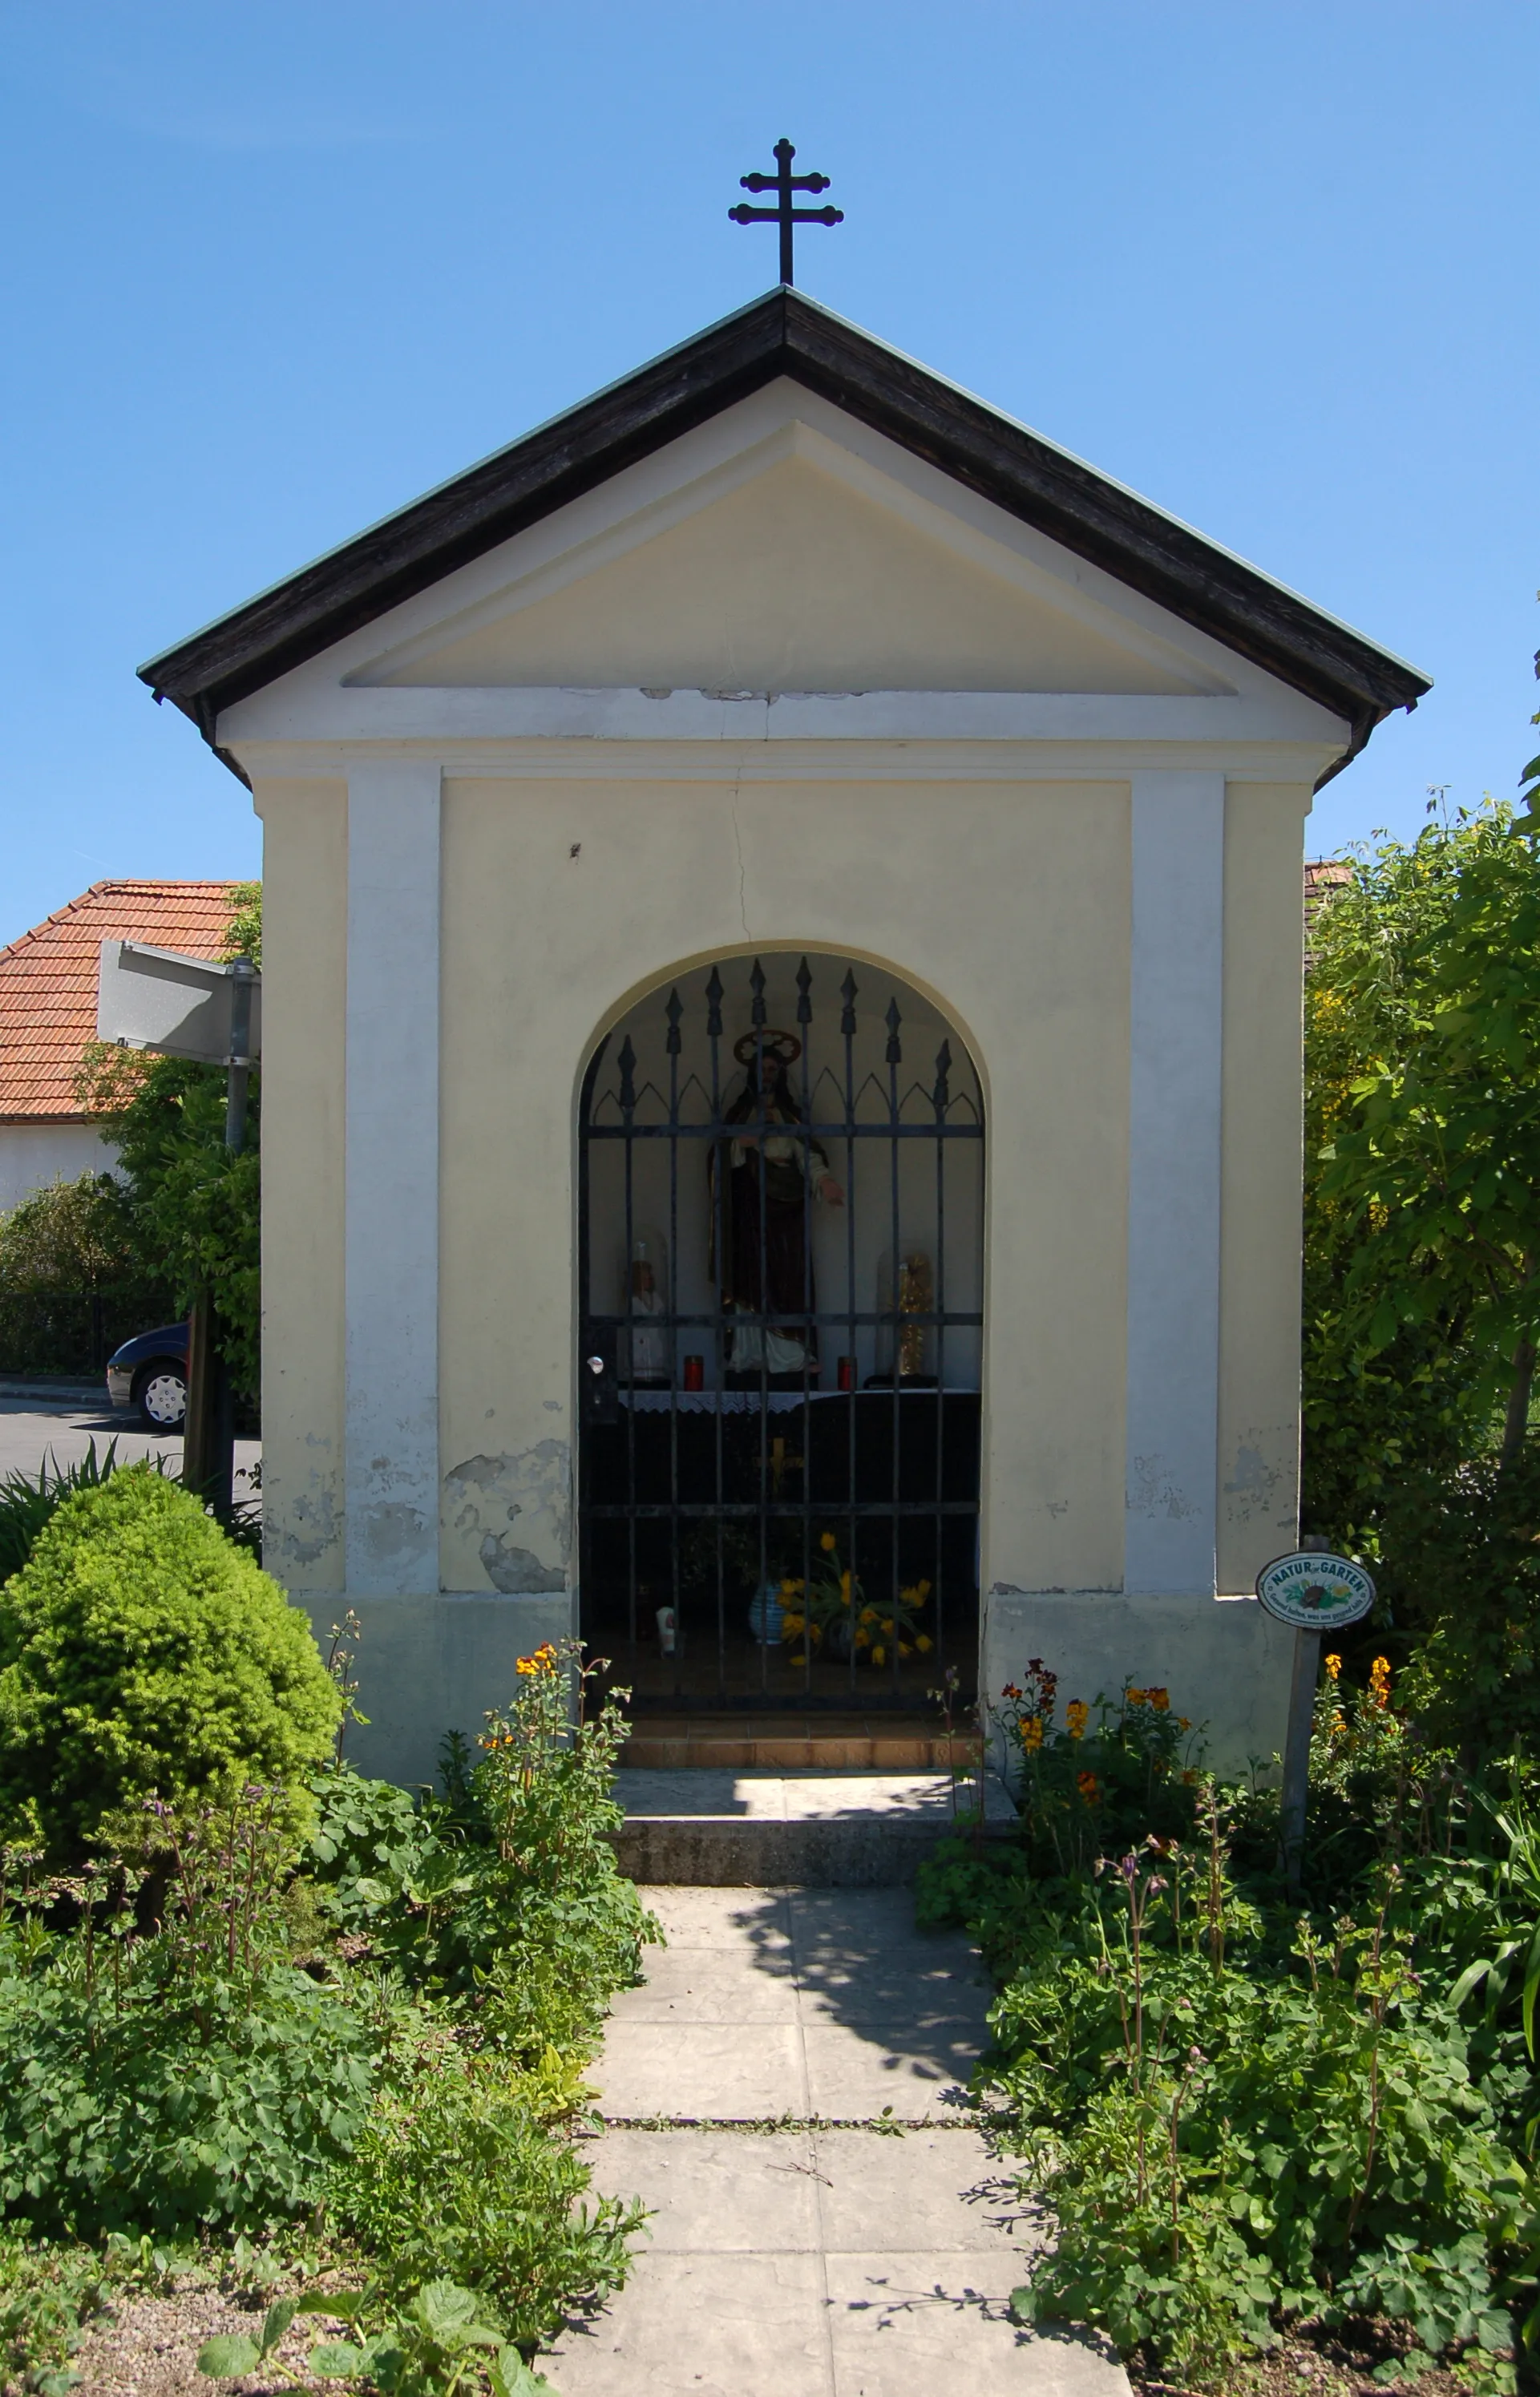 Photo showing: The chapel in Aigen, municipality of Hernstein, Lower Austria, is protected as a cultural heritage monument.